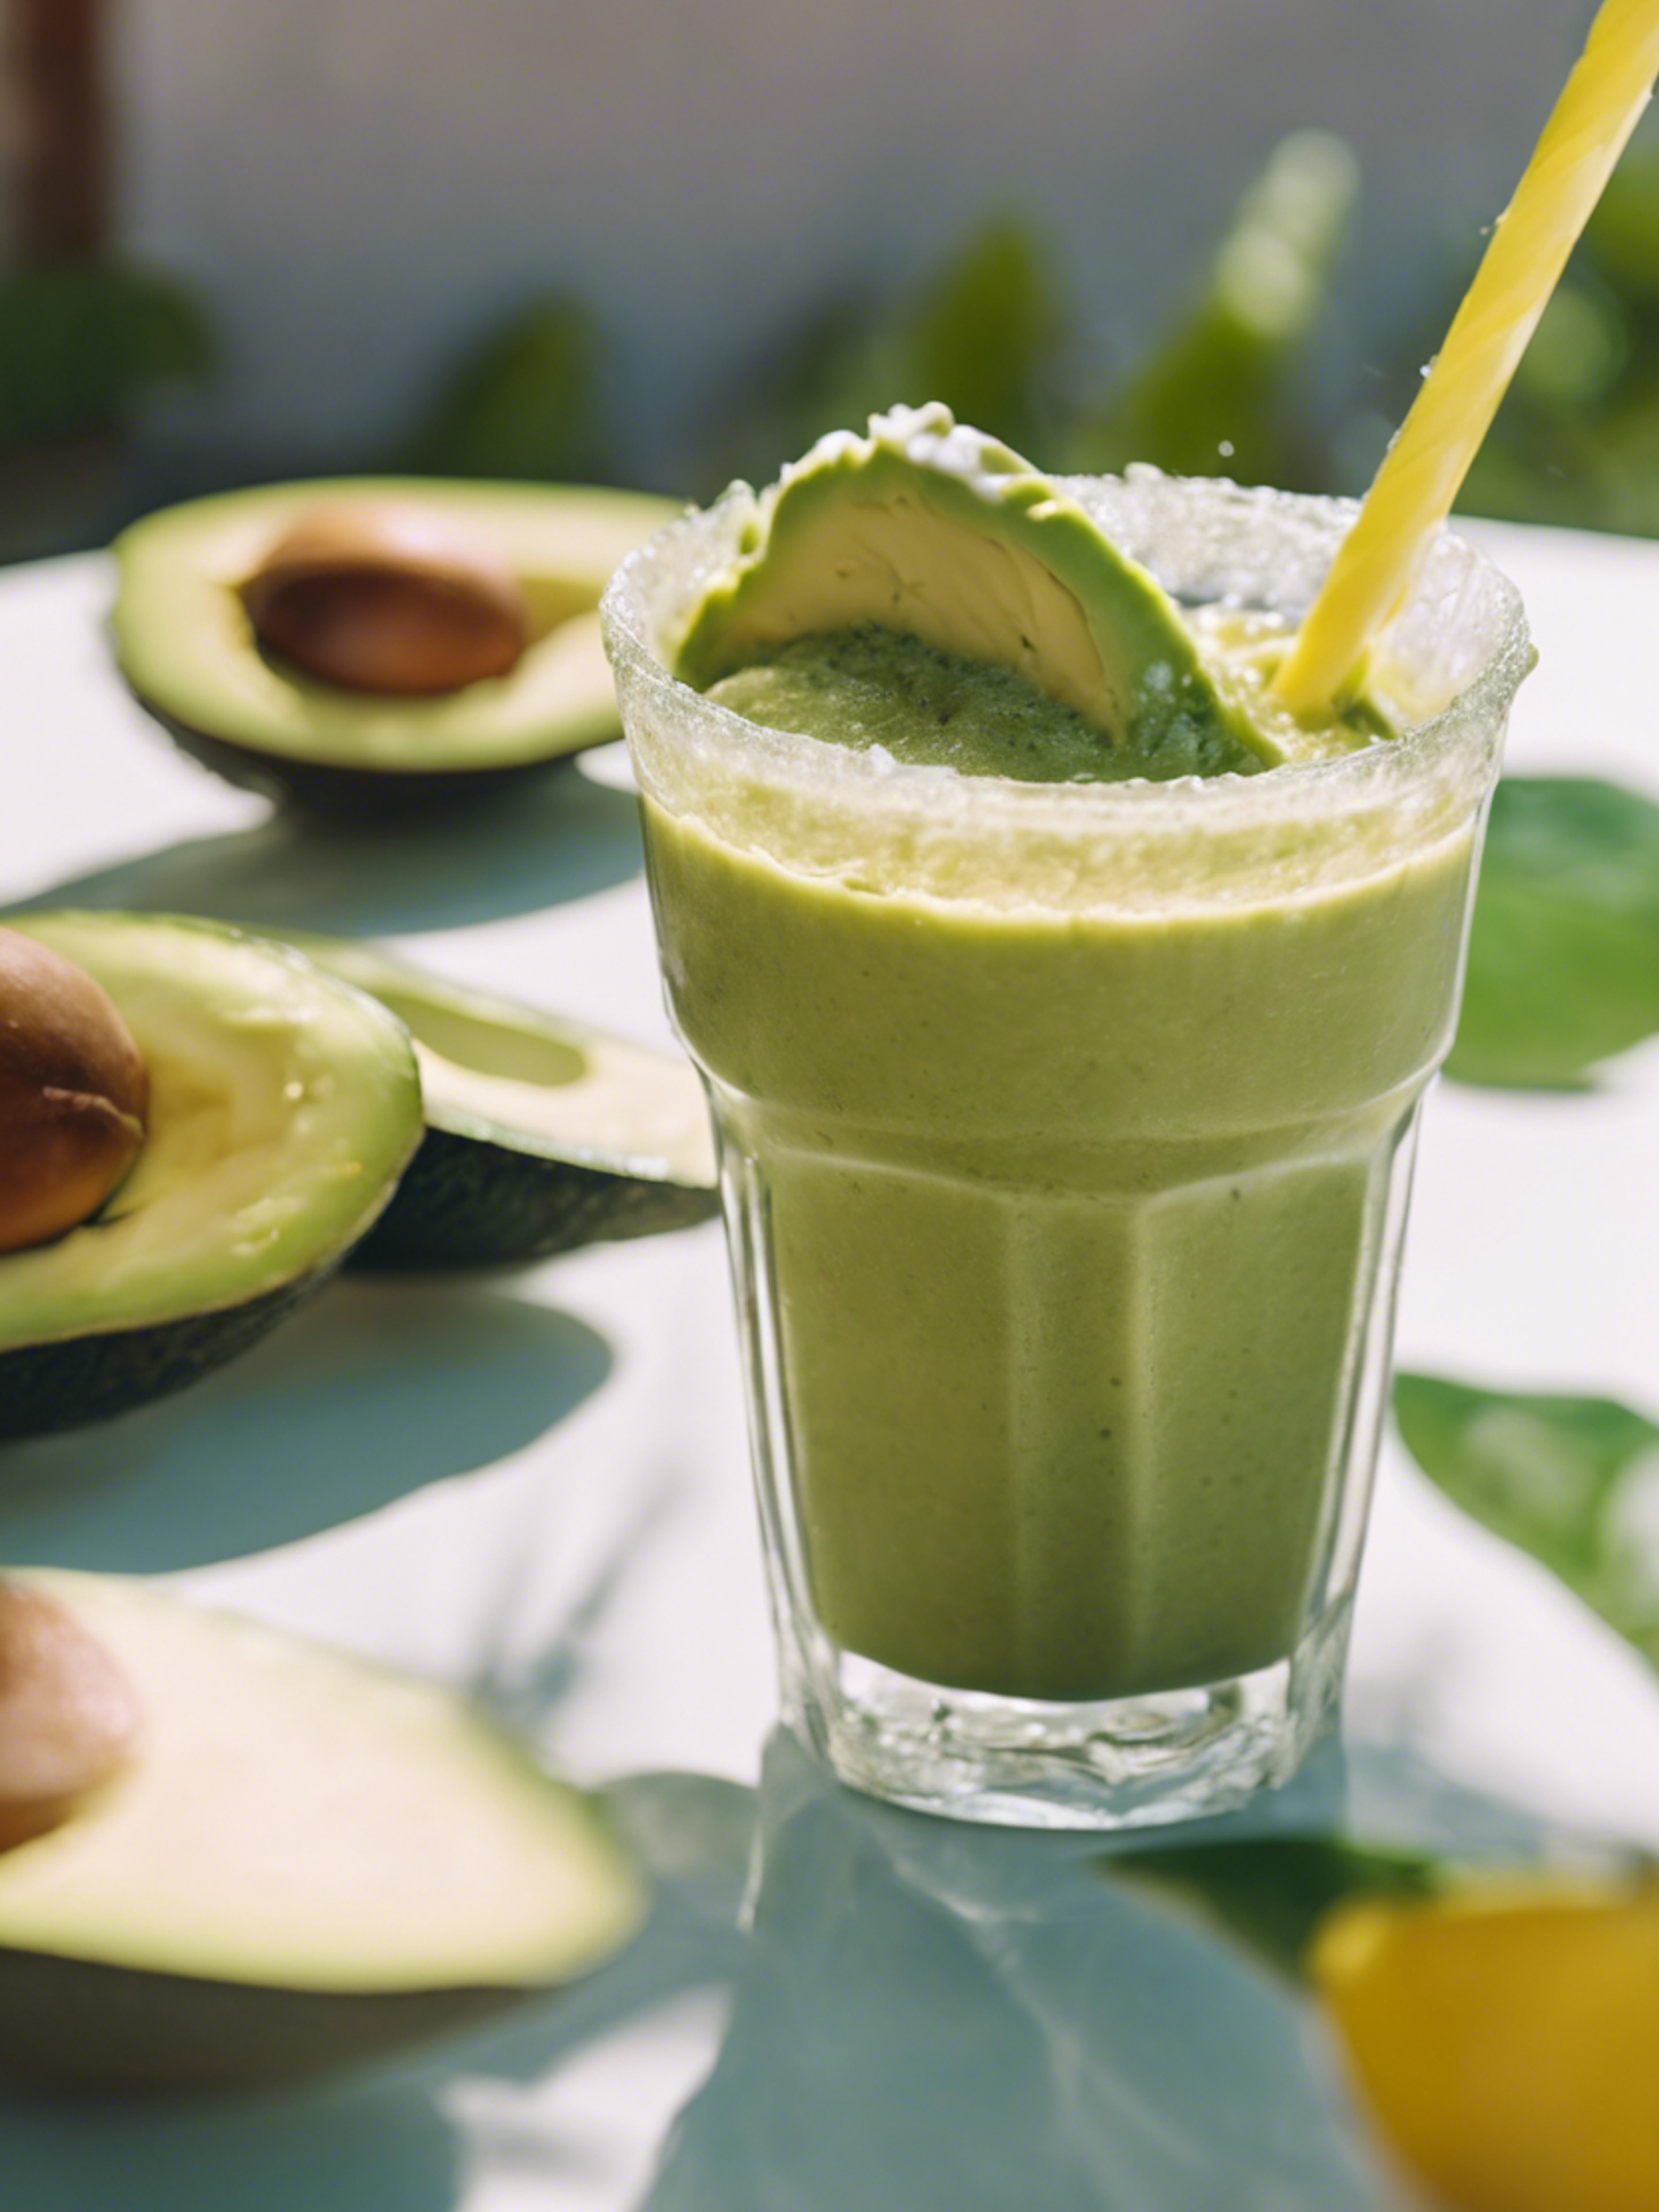 A playful avocado sipping on tropical smoothie on a hot summer day壁紙[3b128a2f6f1a4fb38d08]